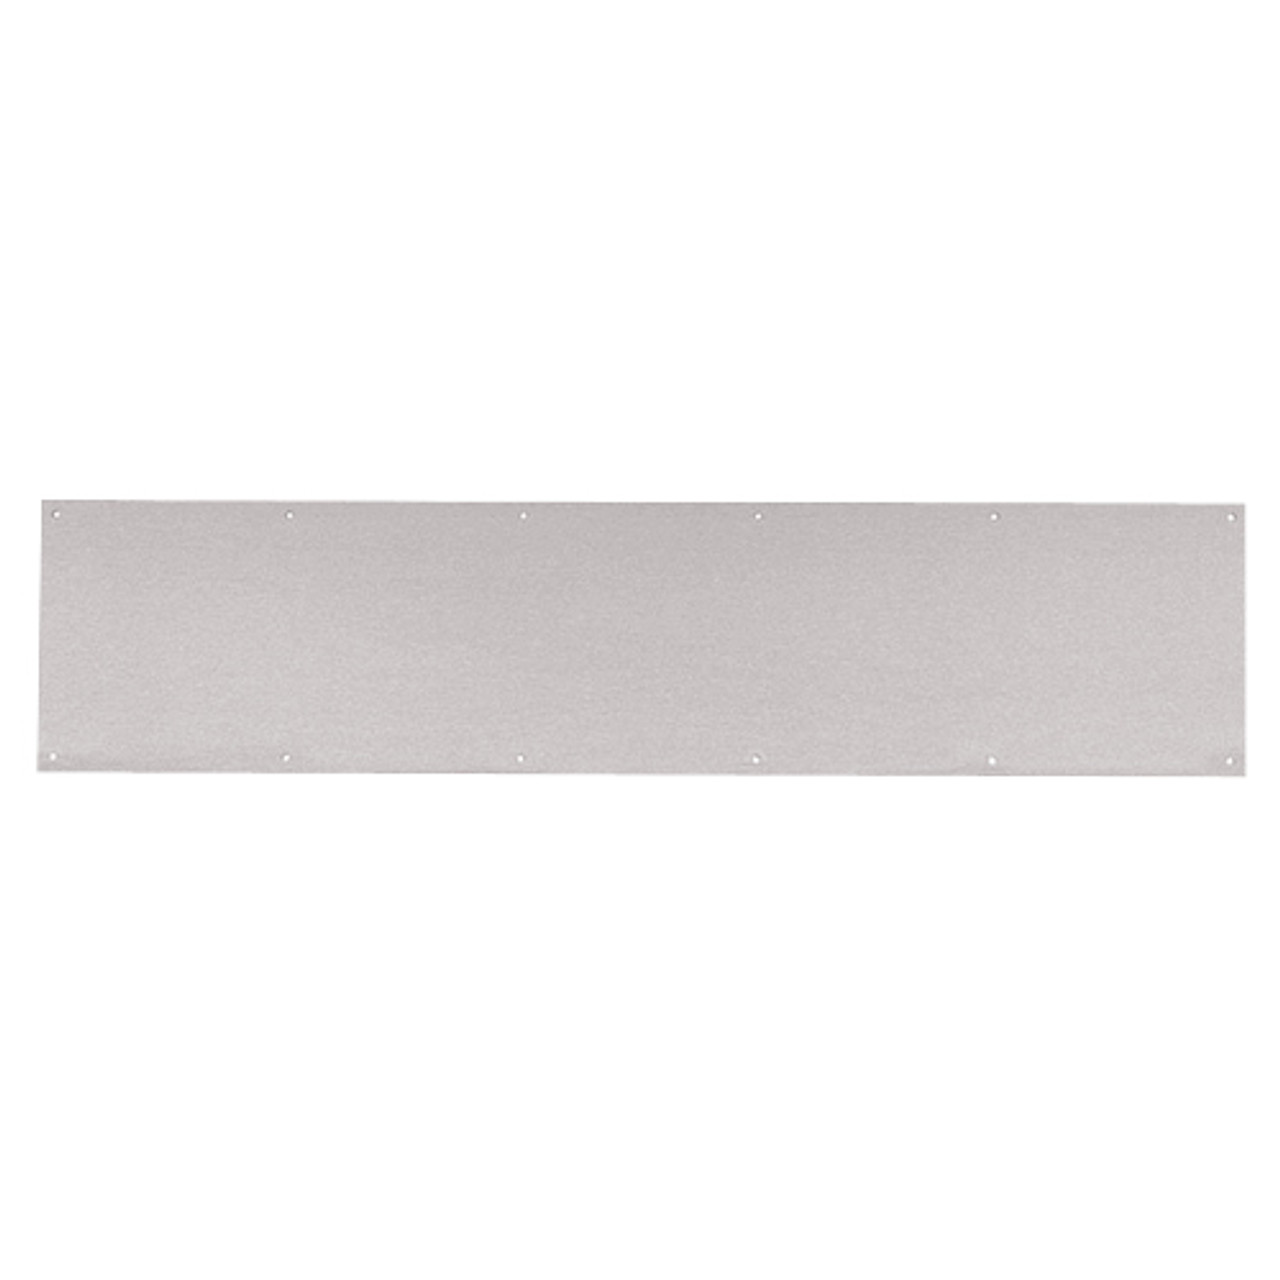 8400-US32D-4x28-B-CS Ives 8400 Series Protection Plate in Satin Stainless Steel